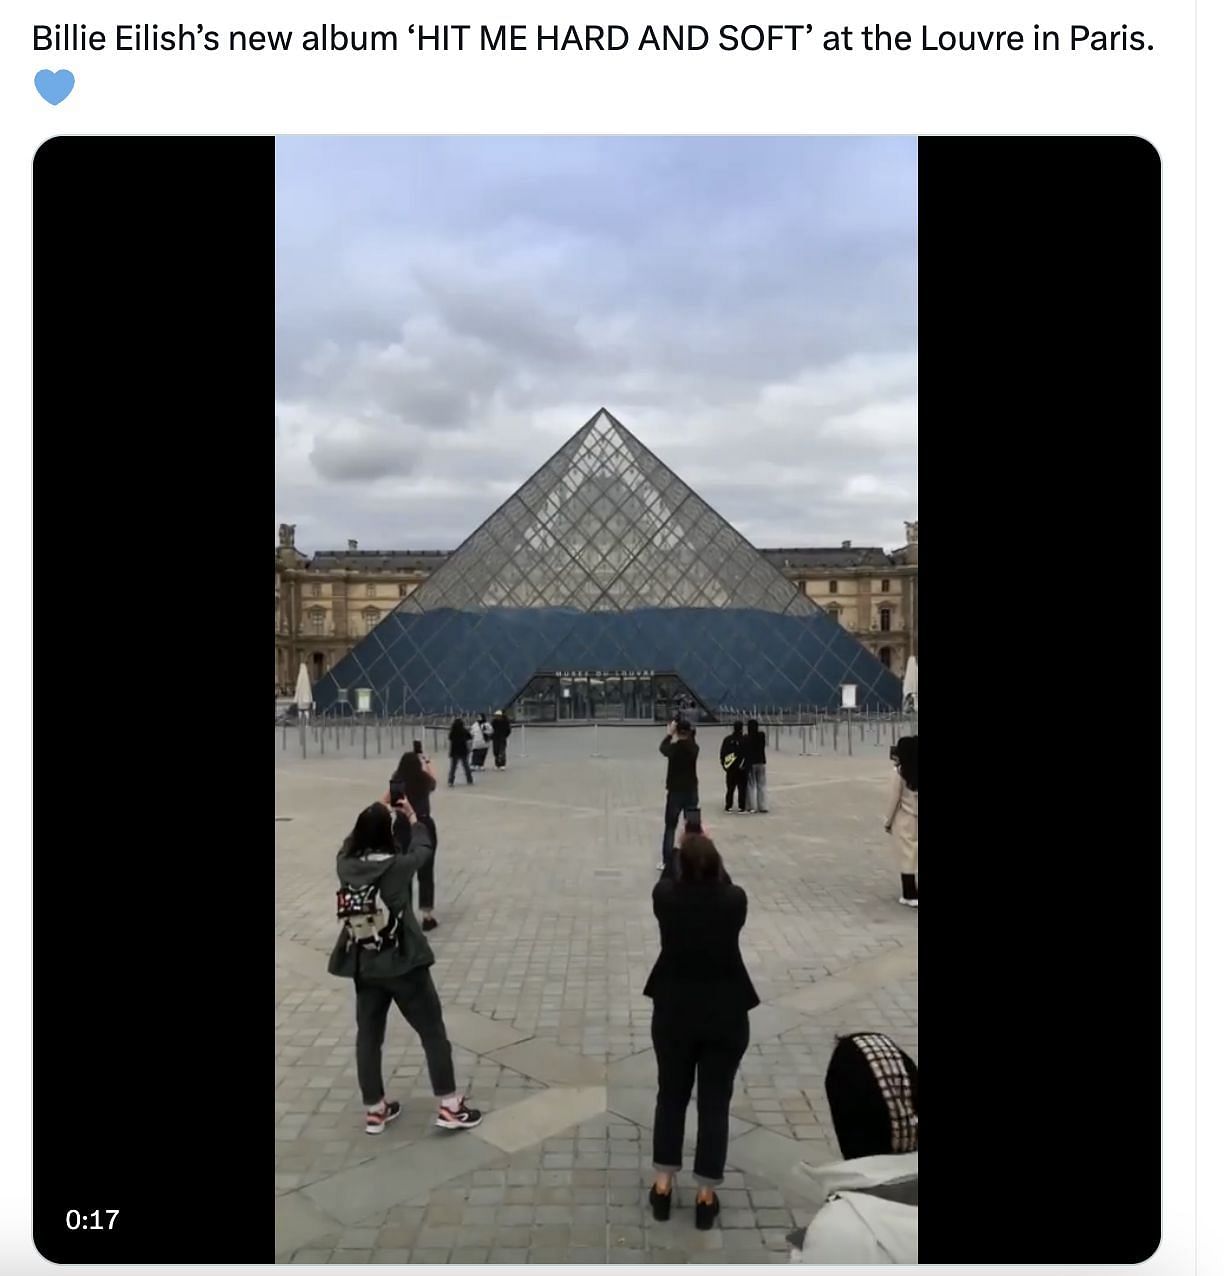 Eilish&#039;s song &lsquo;Hit Me Hard and Soft&rsquo; promo was not displayed at The Louvre in Paris: Fake news debunked. (Image via @PopCrave/ X)